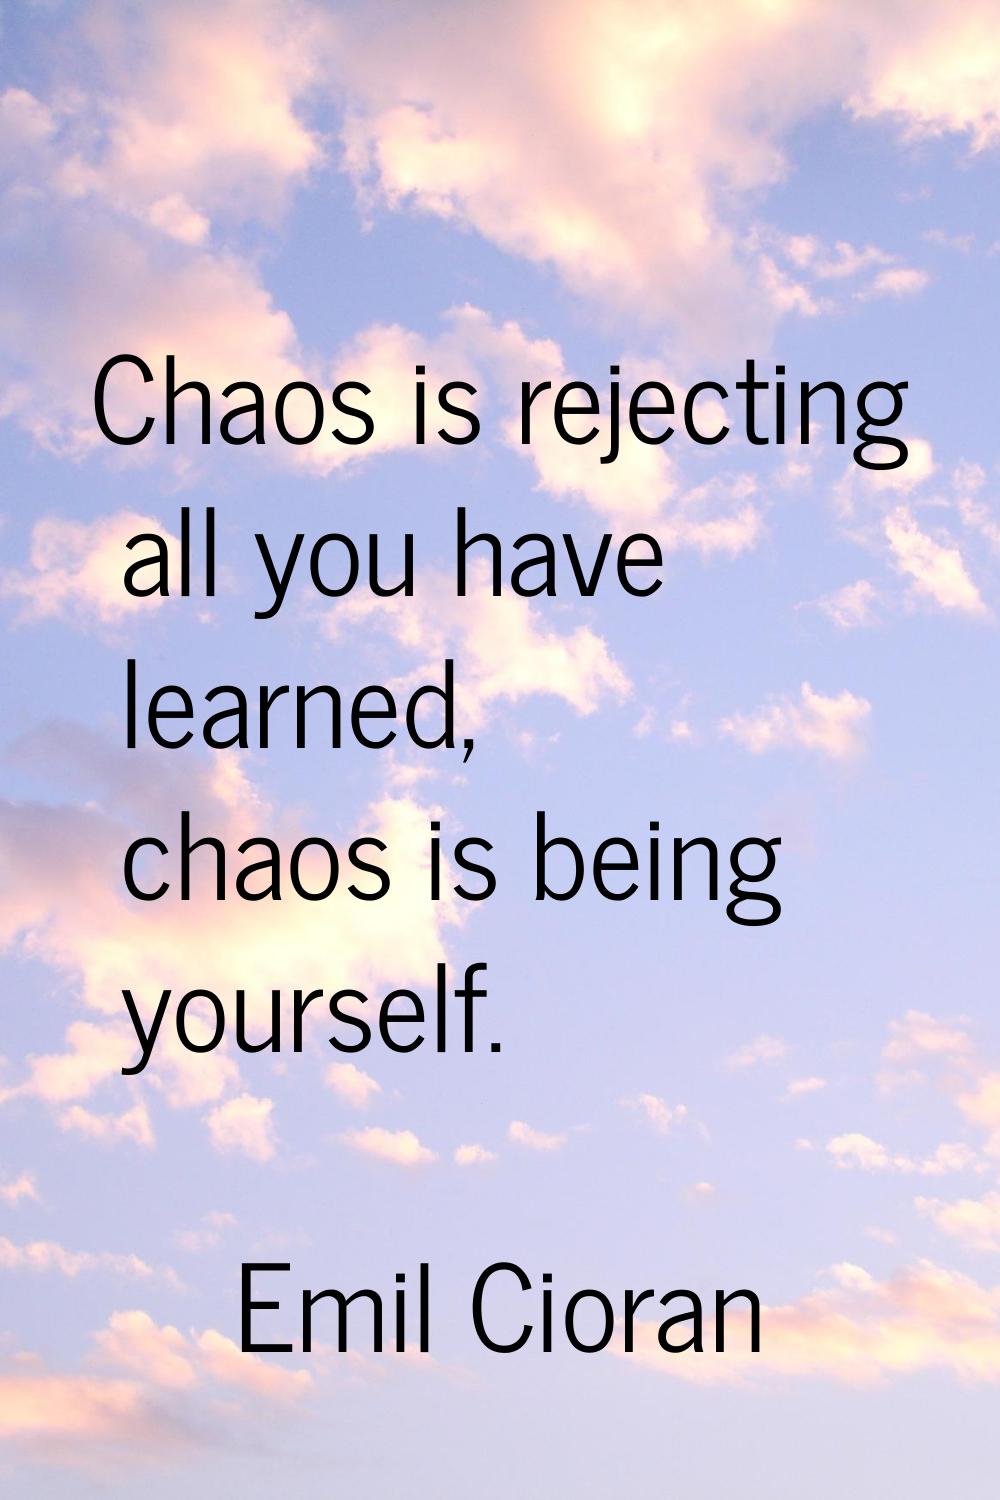 Chaos is rejecting all you have learned, chaos is being yourself.